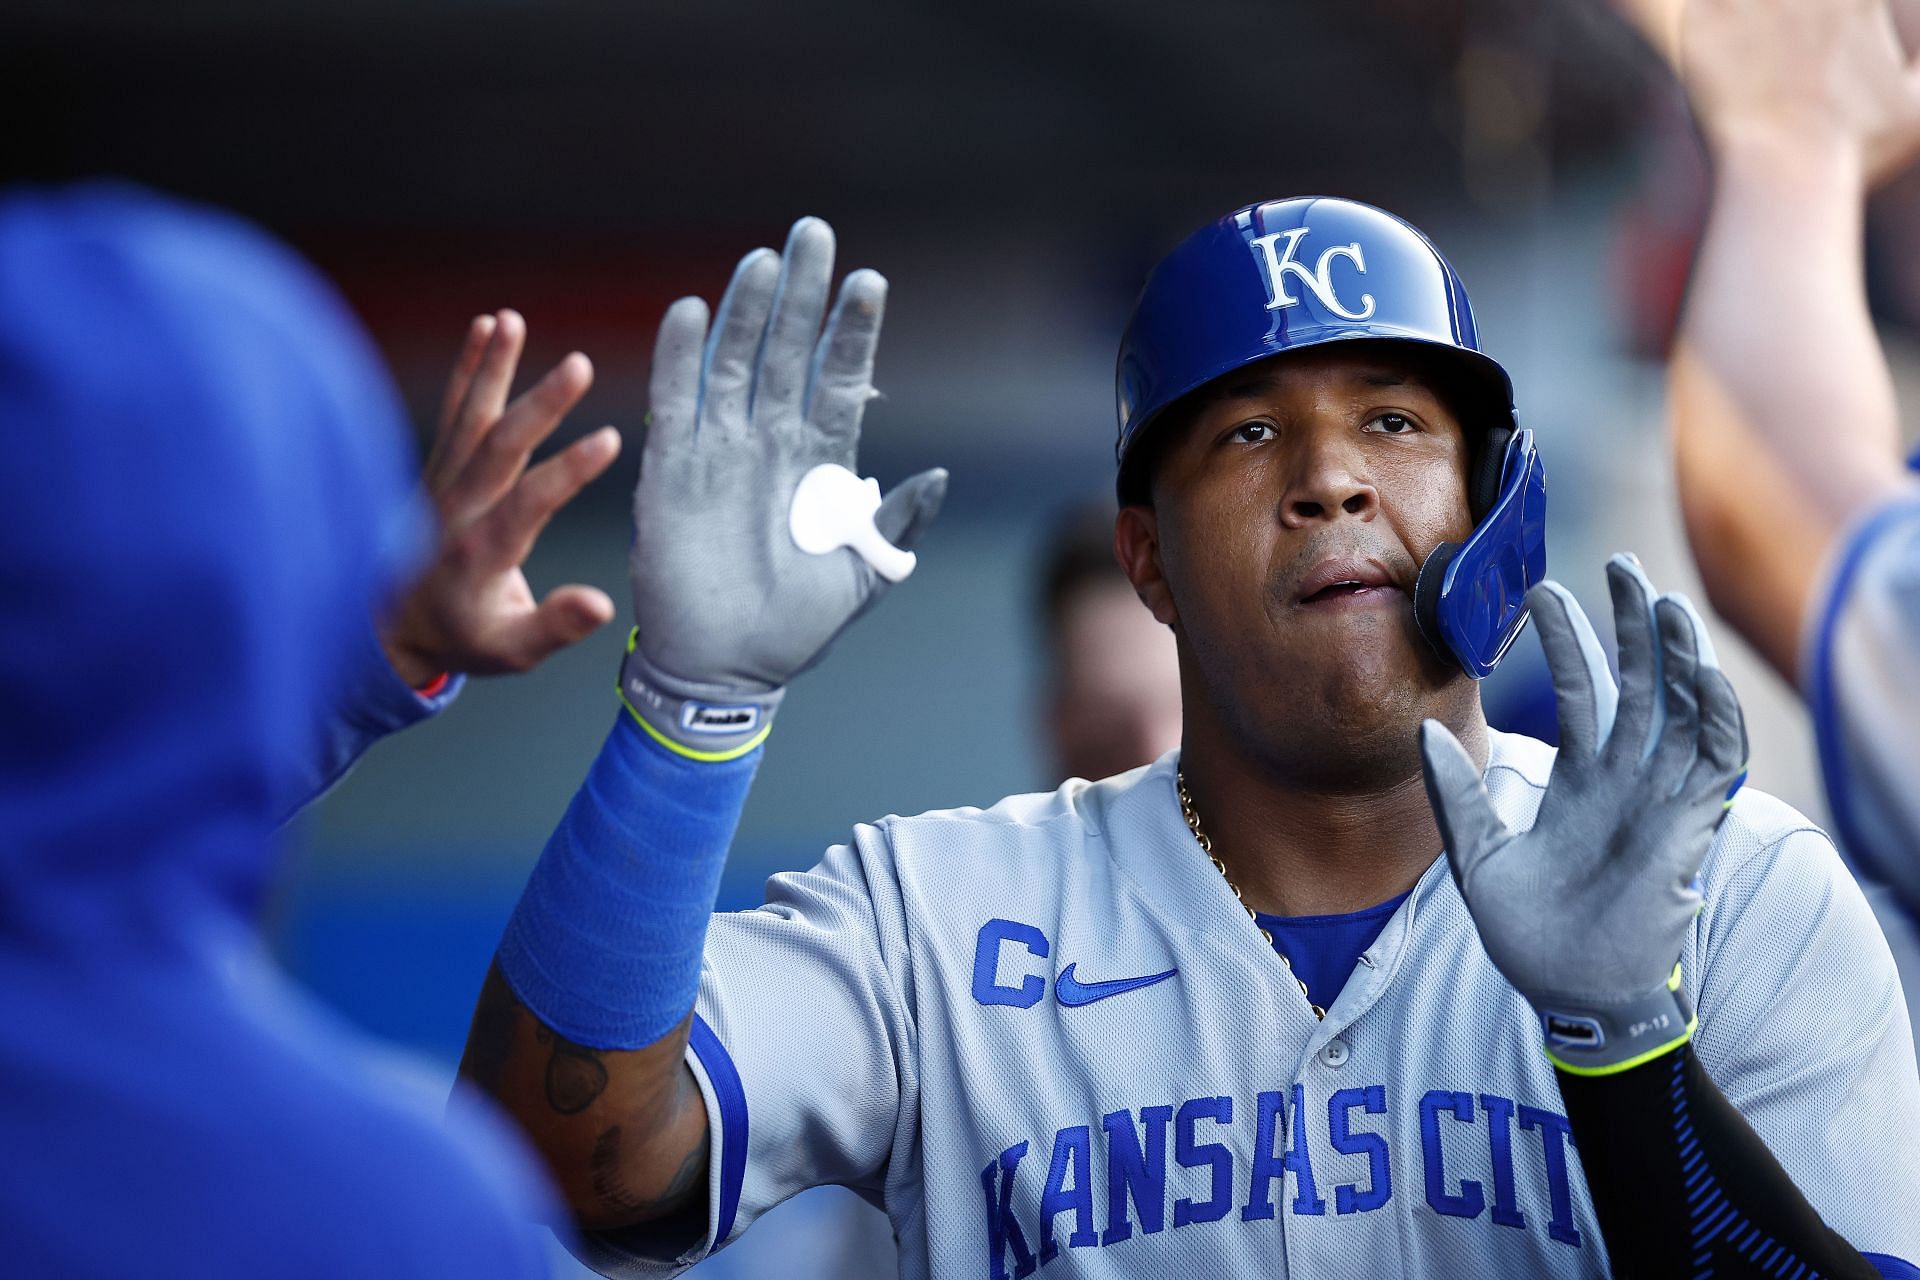 It sure seems like the Royals wildly mishandled Salvador Perez's